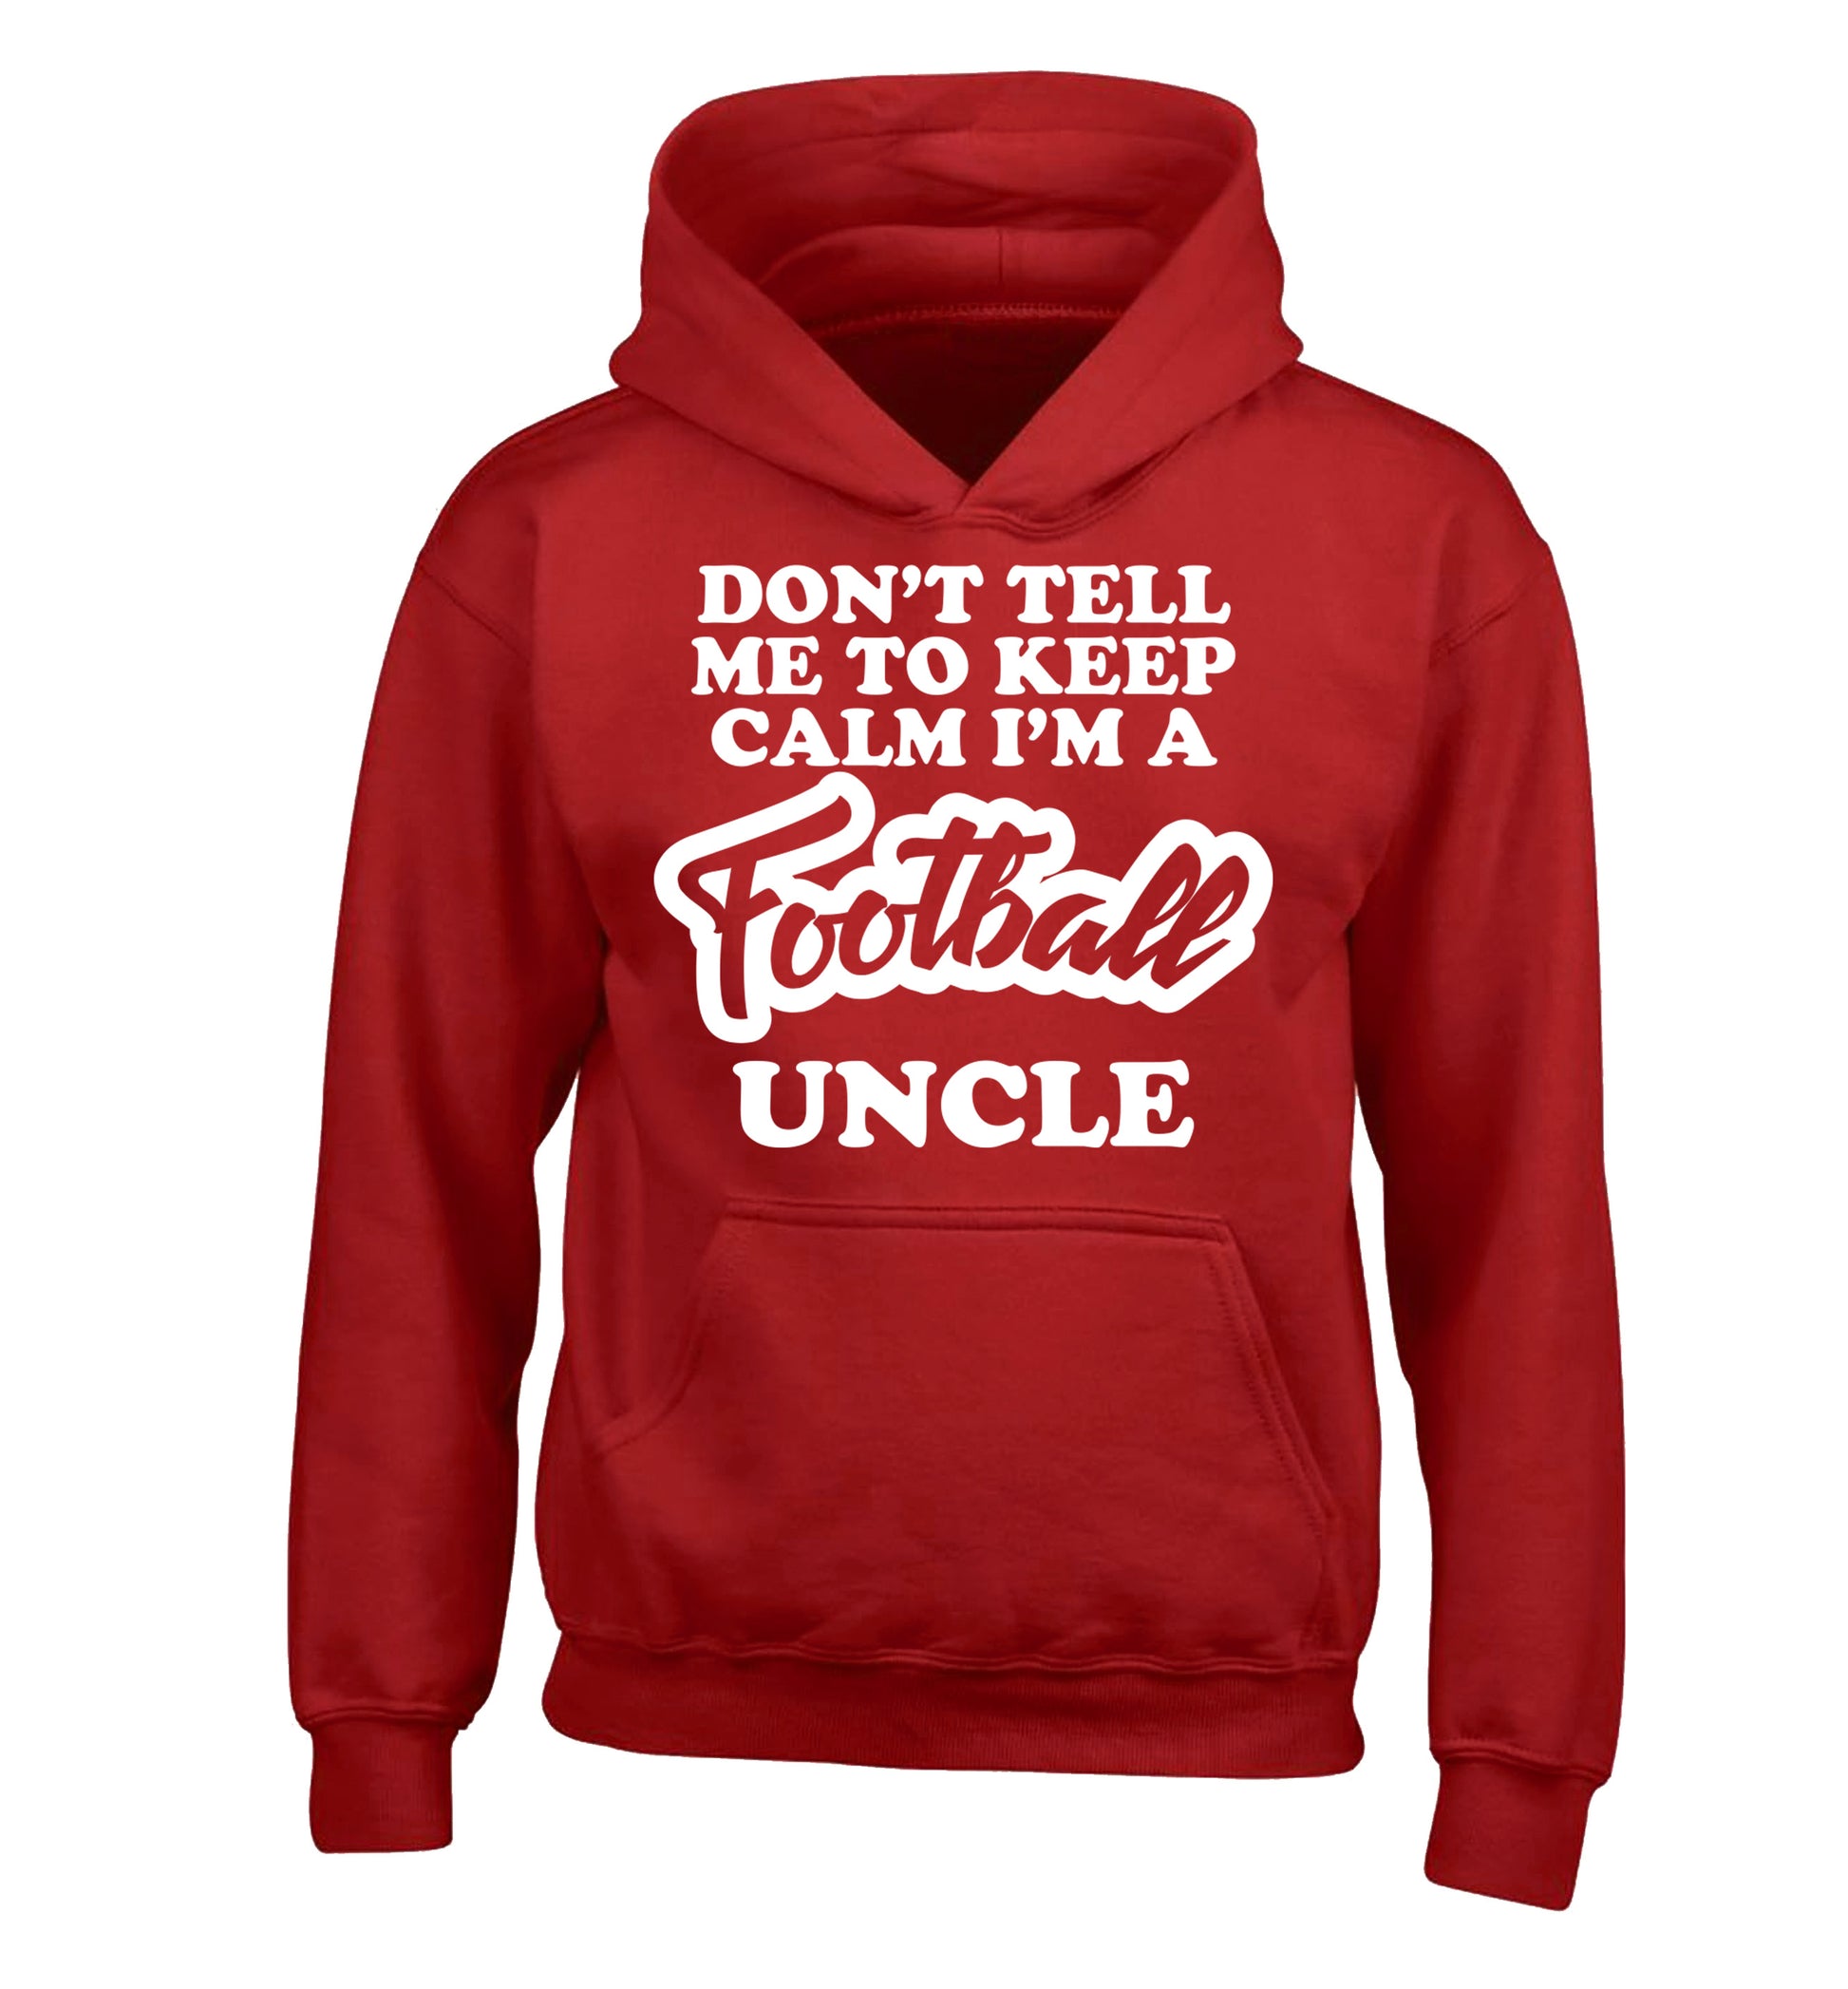 Worlds most amazing football uncle children's red hoodie 12-14 Years